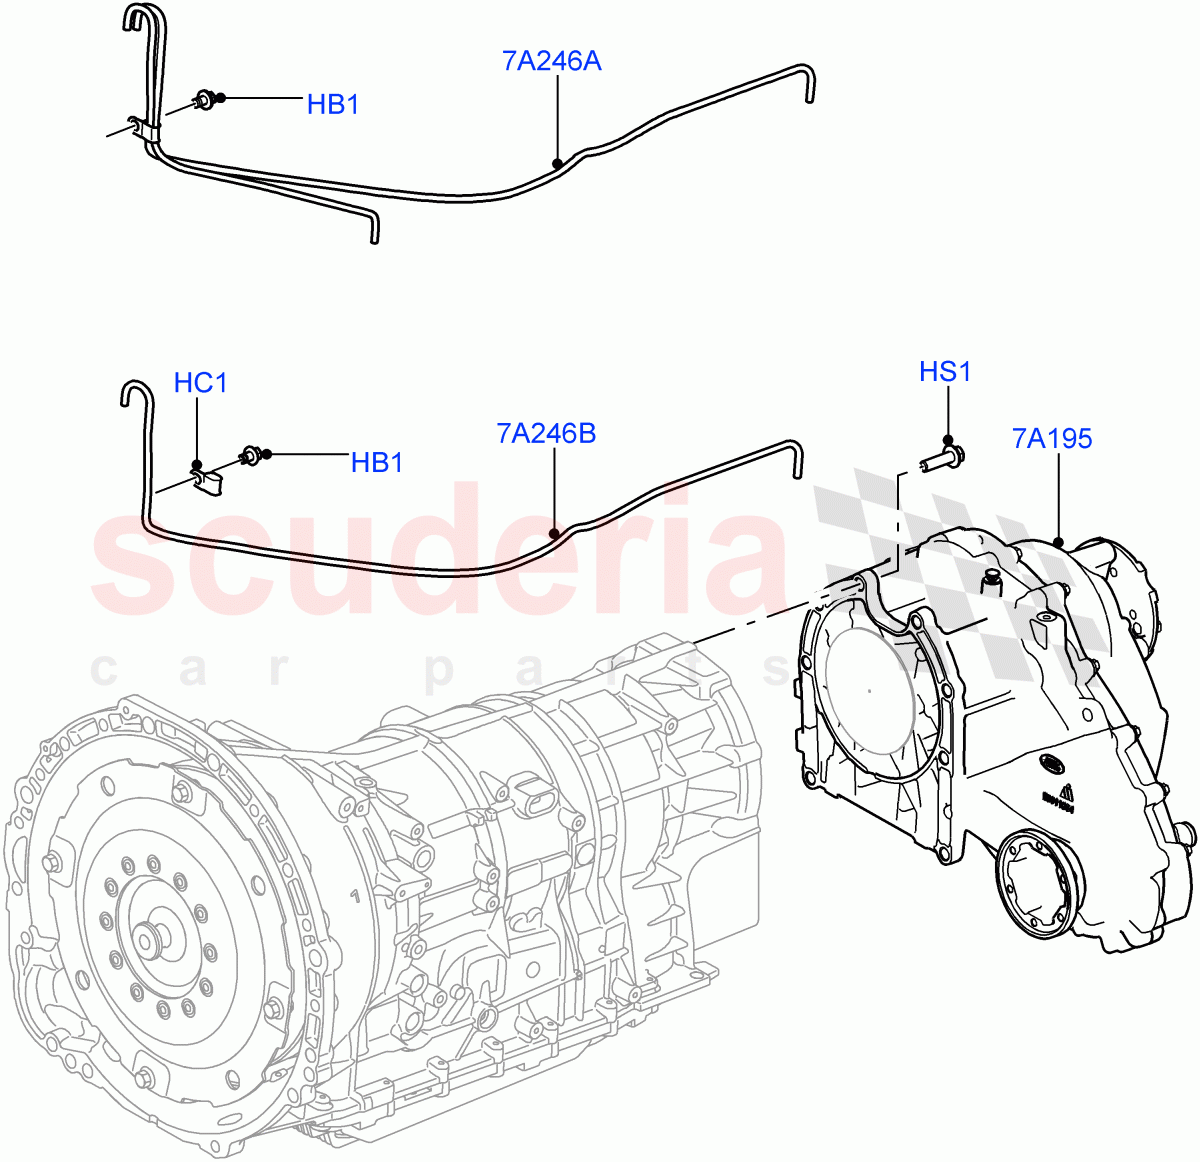 Transfer Drive Case(8 Speed Auto Trans ZF 8HP45,With 1 Speed Transfer Case,8 Speed Auto Trans ZF 8HP70 4WD)((V)FROMEA000001,(V)TOGA999999) of Land Rover Land Rover Range Rover Sport (2014+) [3.0 Diesel 24V DOHC TC]